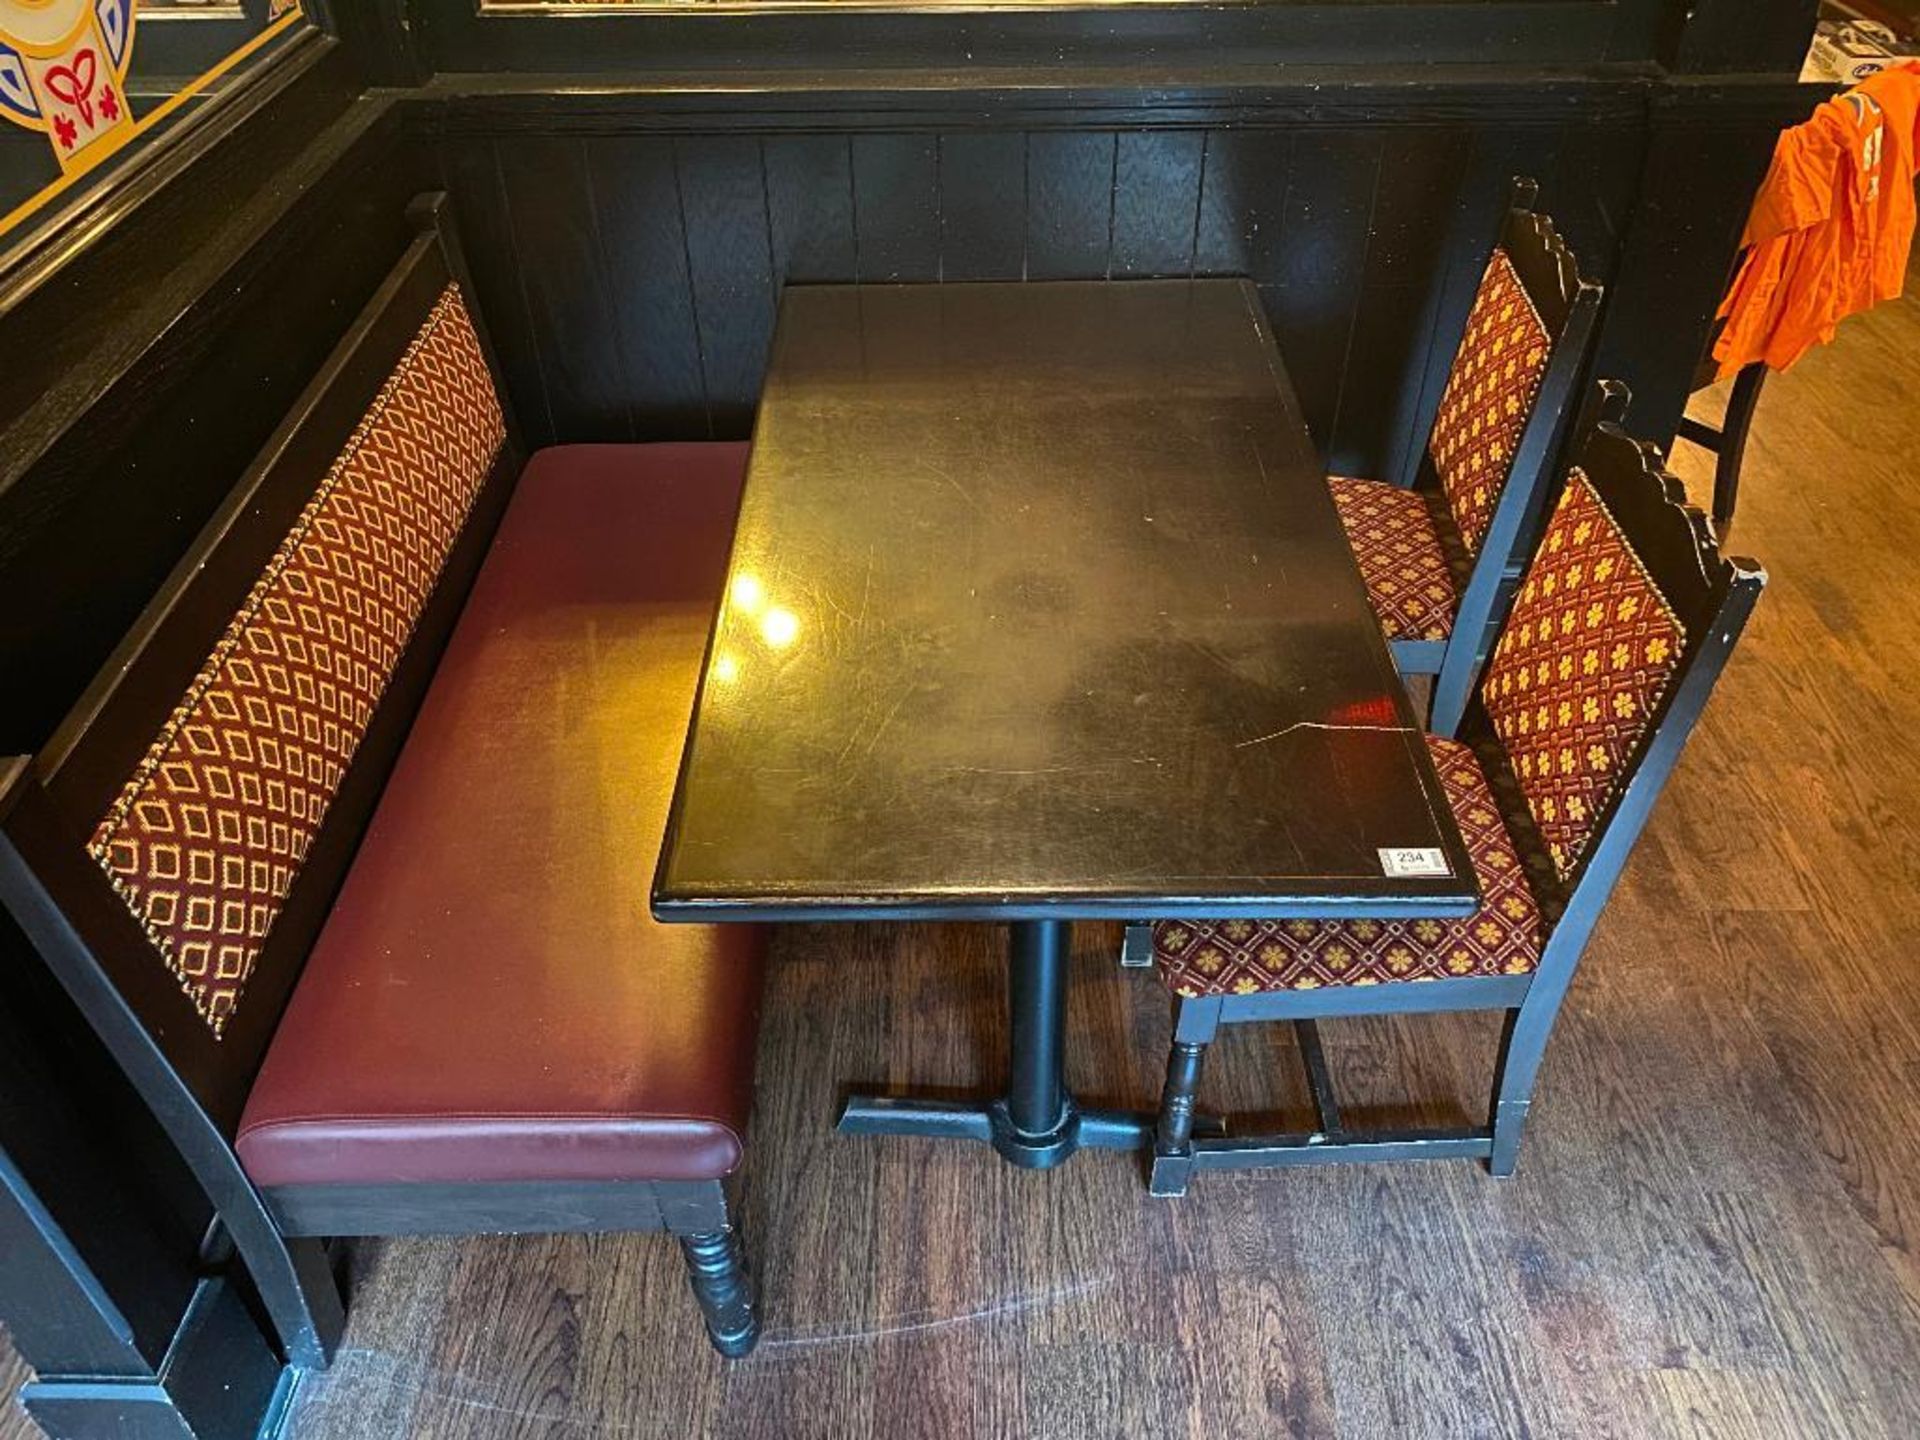 RECTANGULAR TABLE WITH 2 CHAIRS & 54" BURGUNDY BENCH - Image 2 of 3